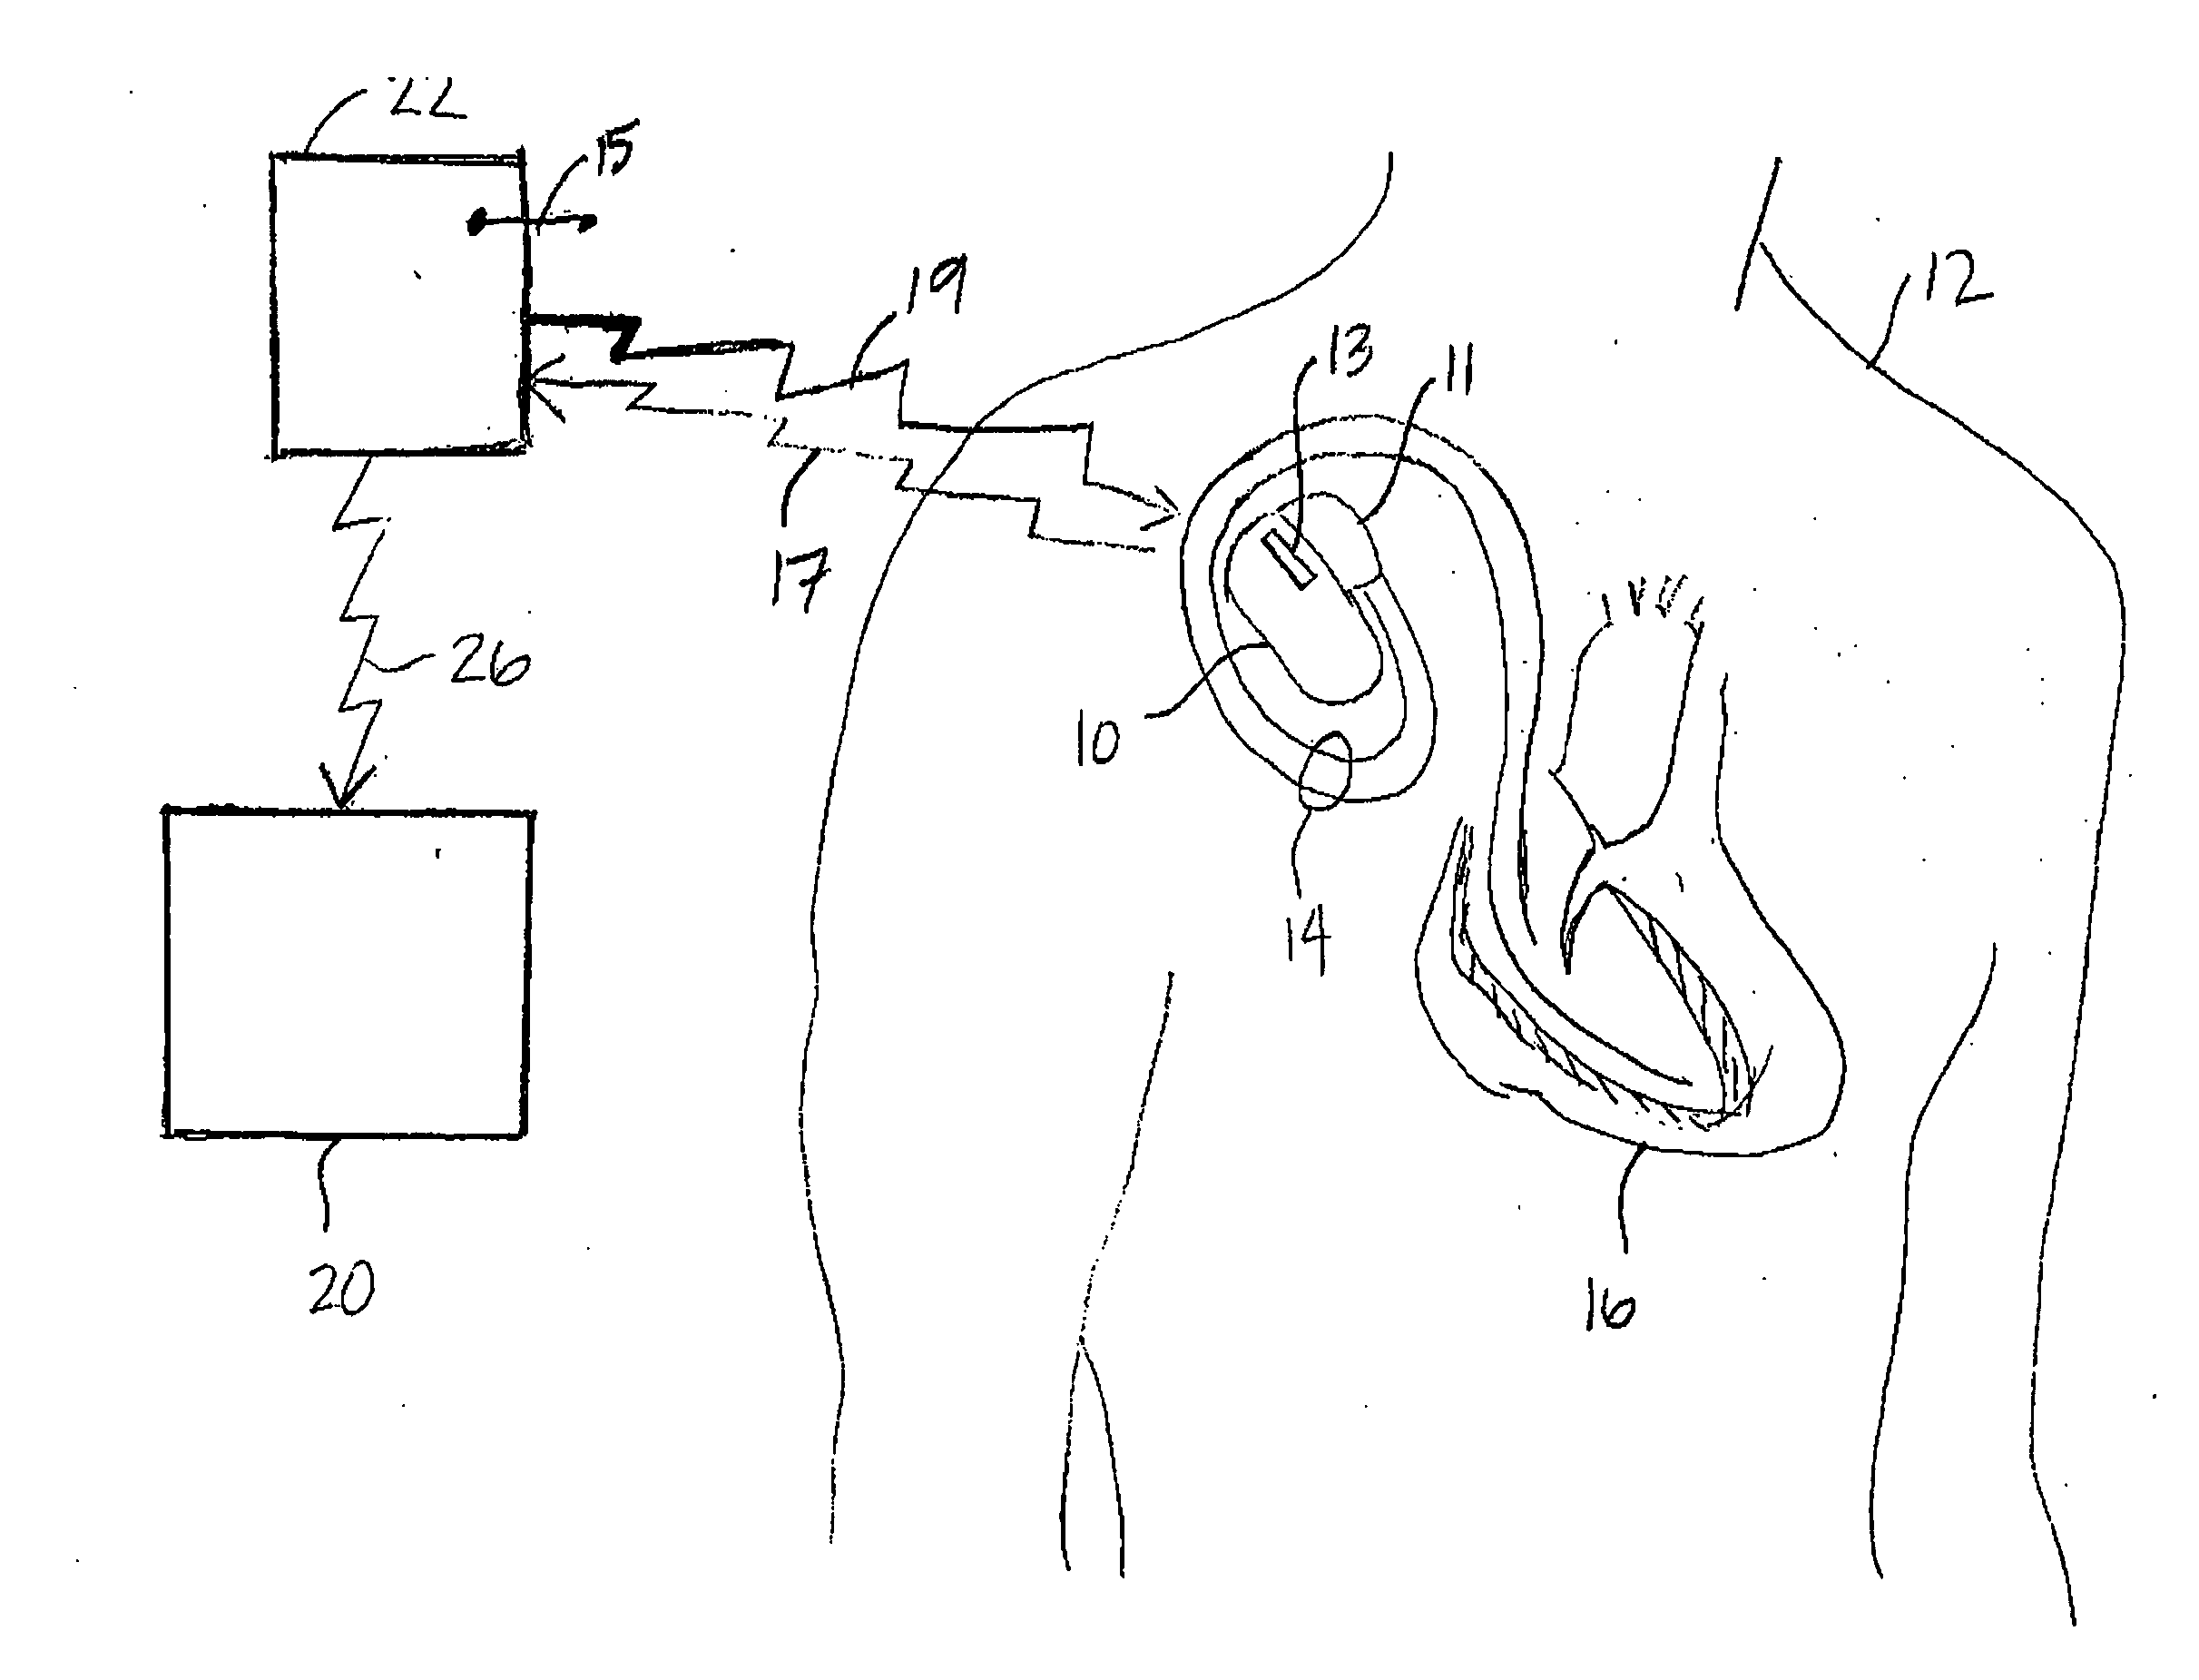 Implantable medical device system with communication link to home appliances